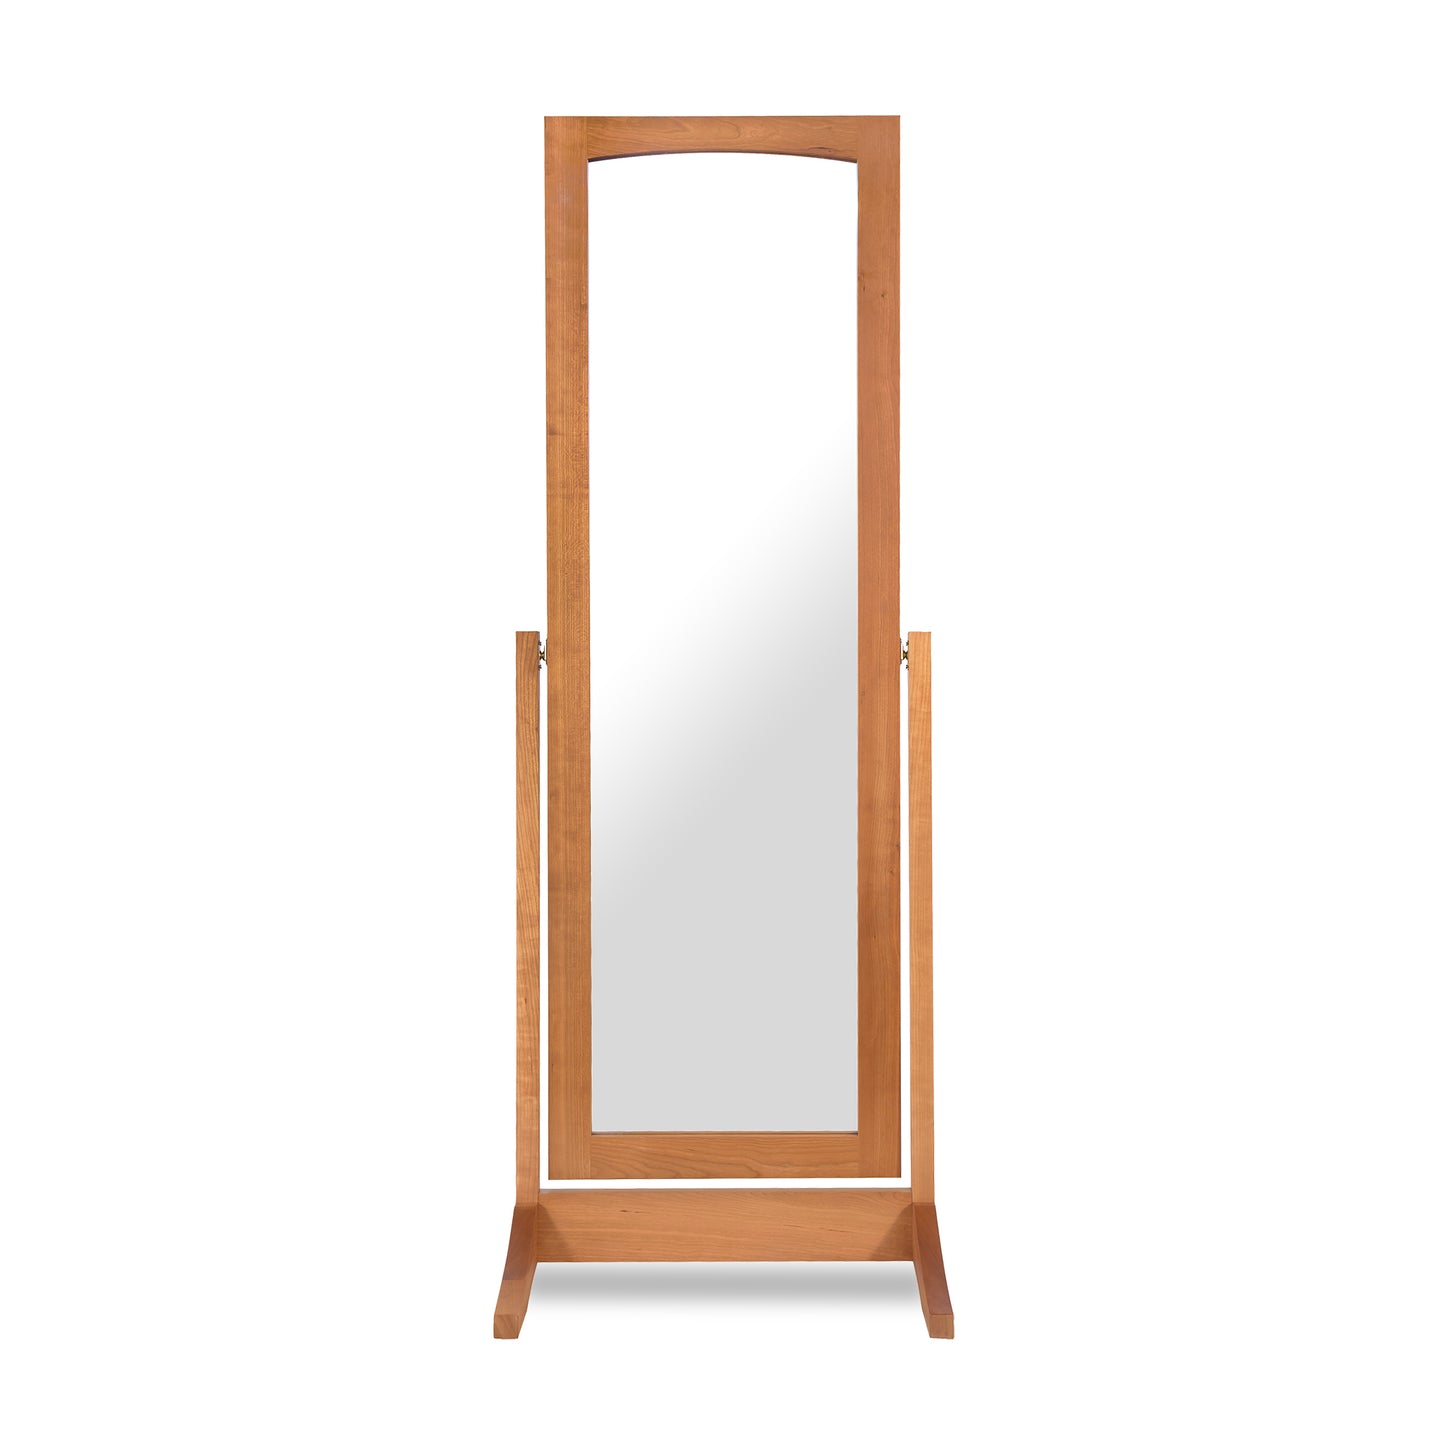 A Lyndon Furniture New England Shaker Floor Mirror on a white background.